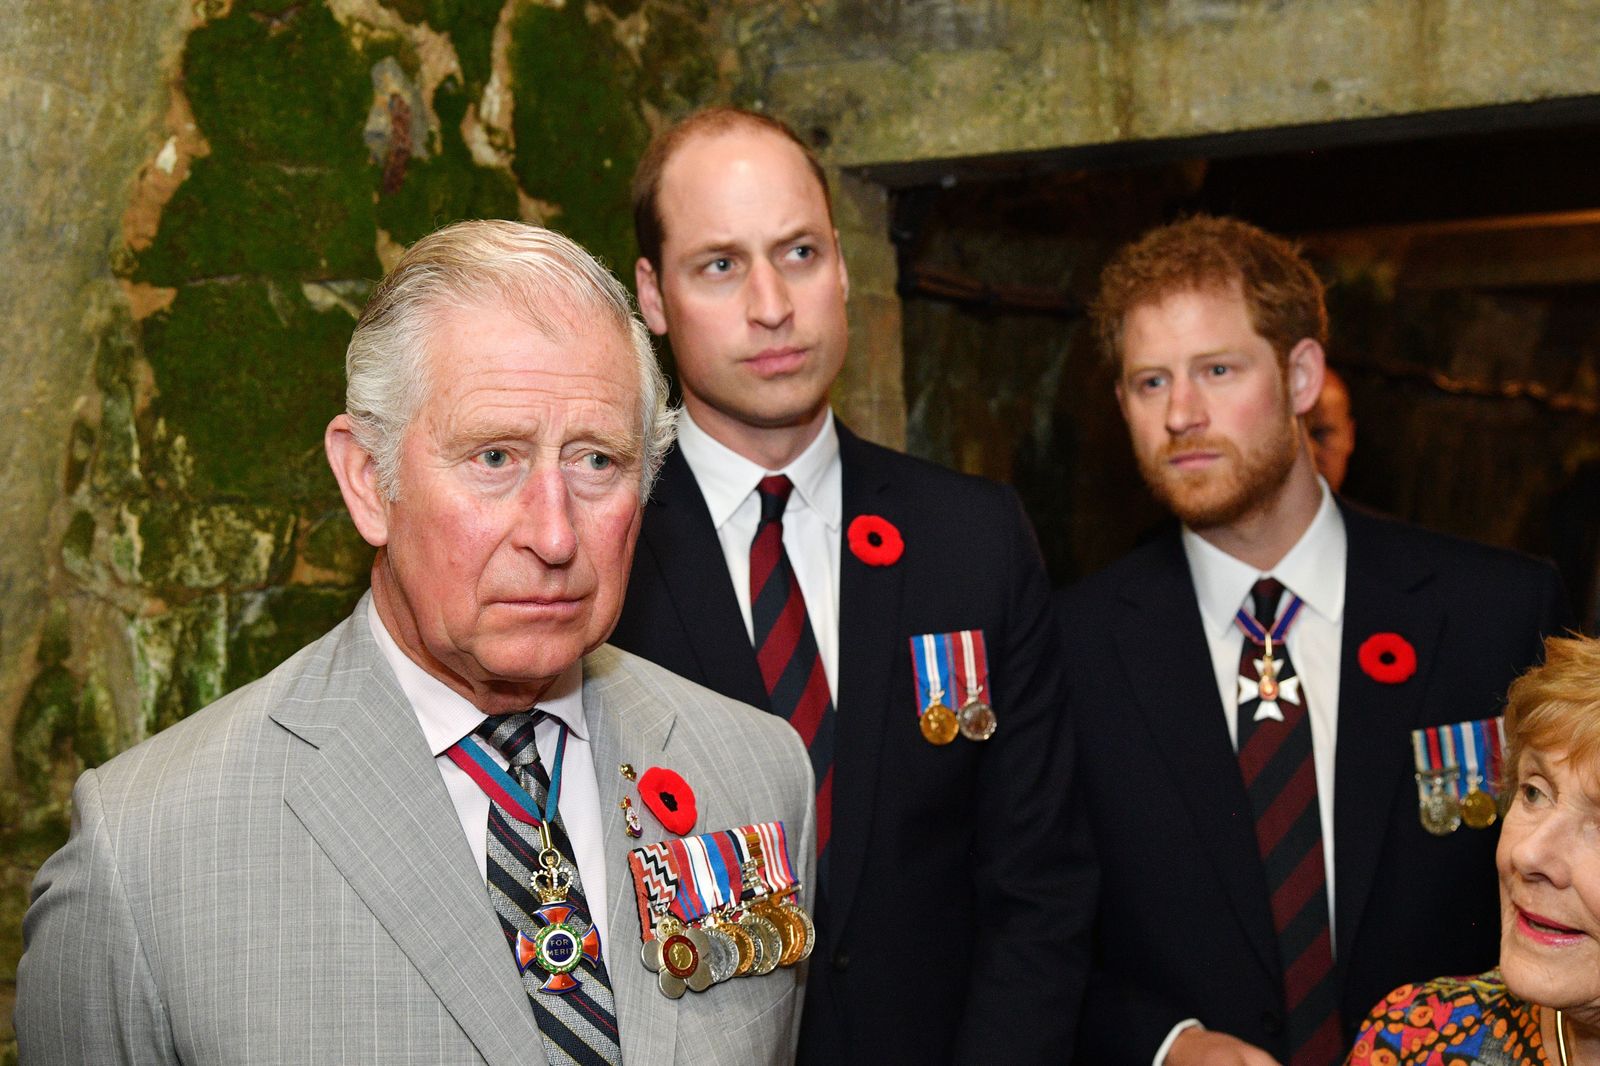 Prince Charles, Prince William, and Prince Harry visit the tunnel and trenches at Vimy Memorial Park on April 9, 2017 in Vimy, France. | Photo: Getty Images